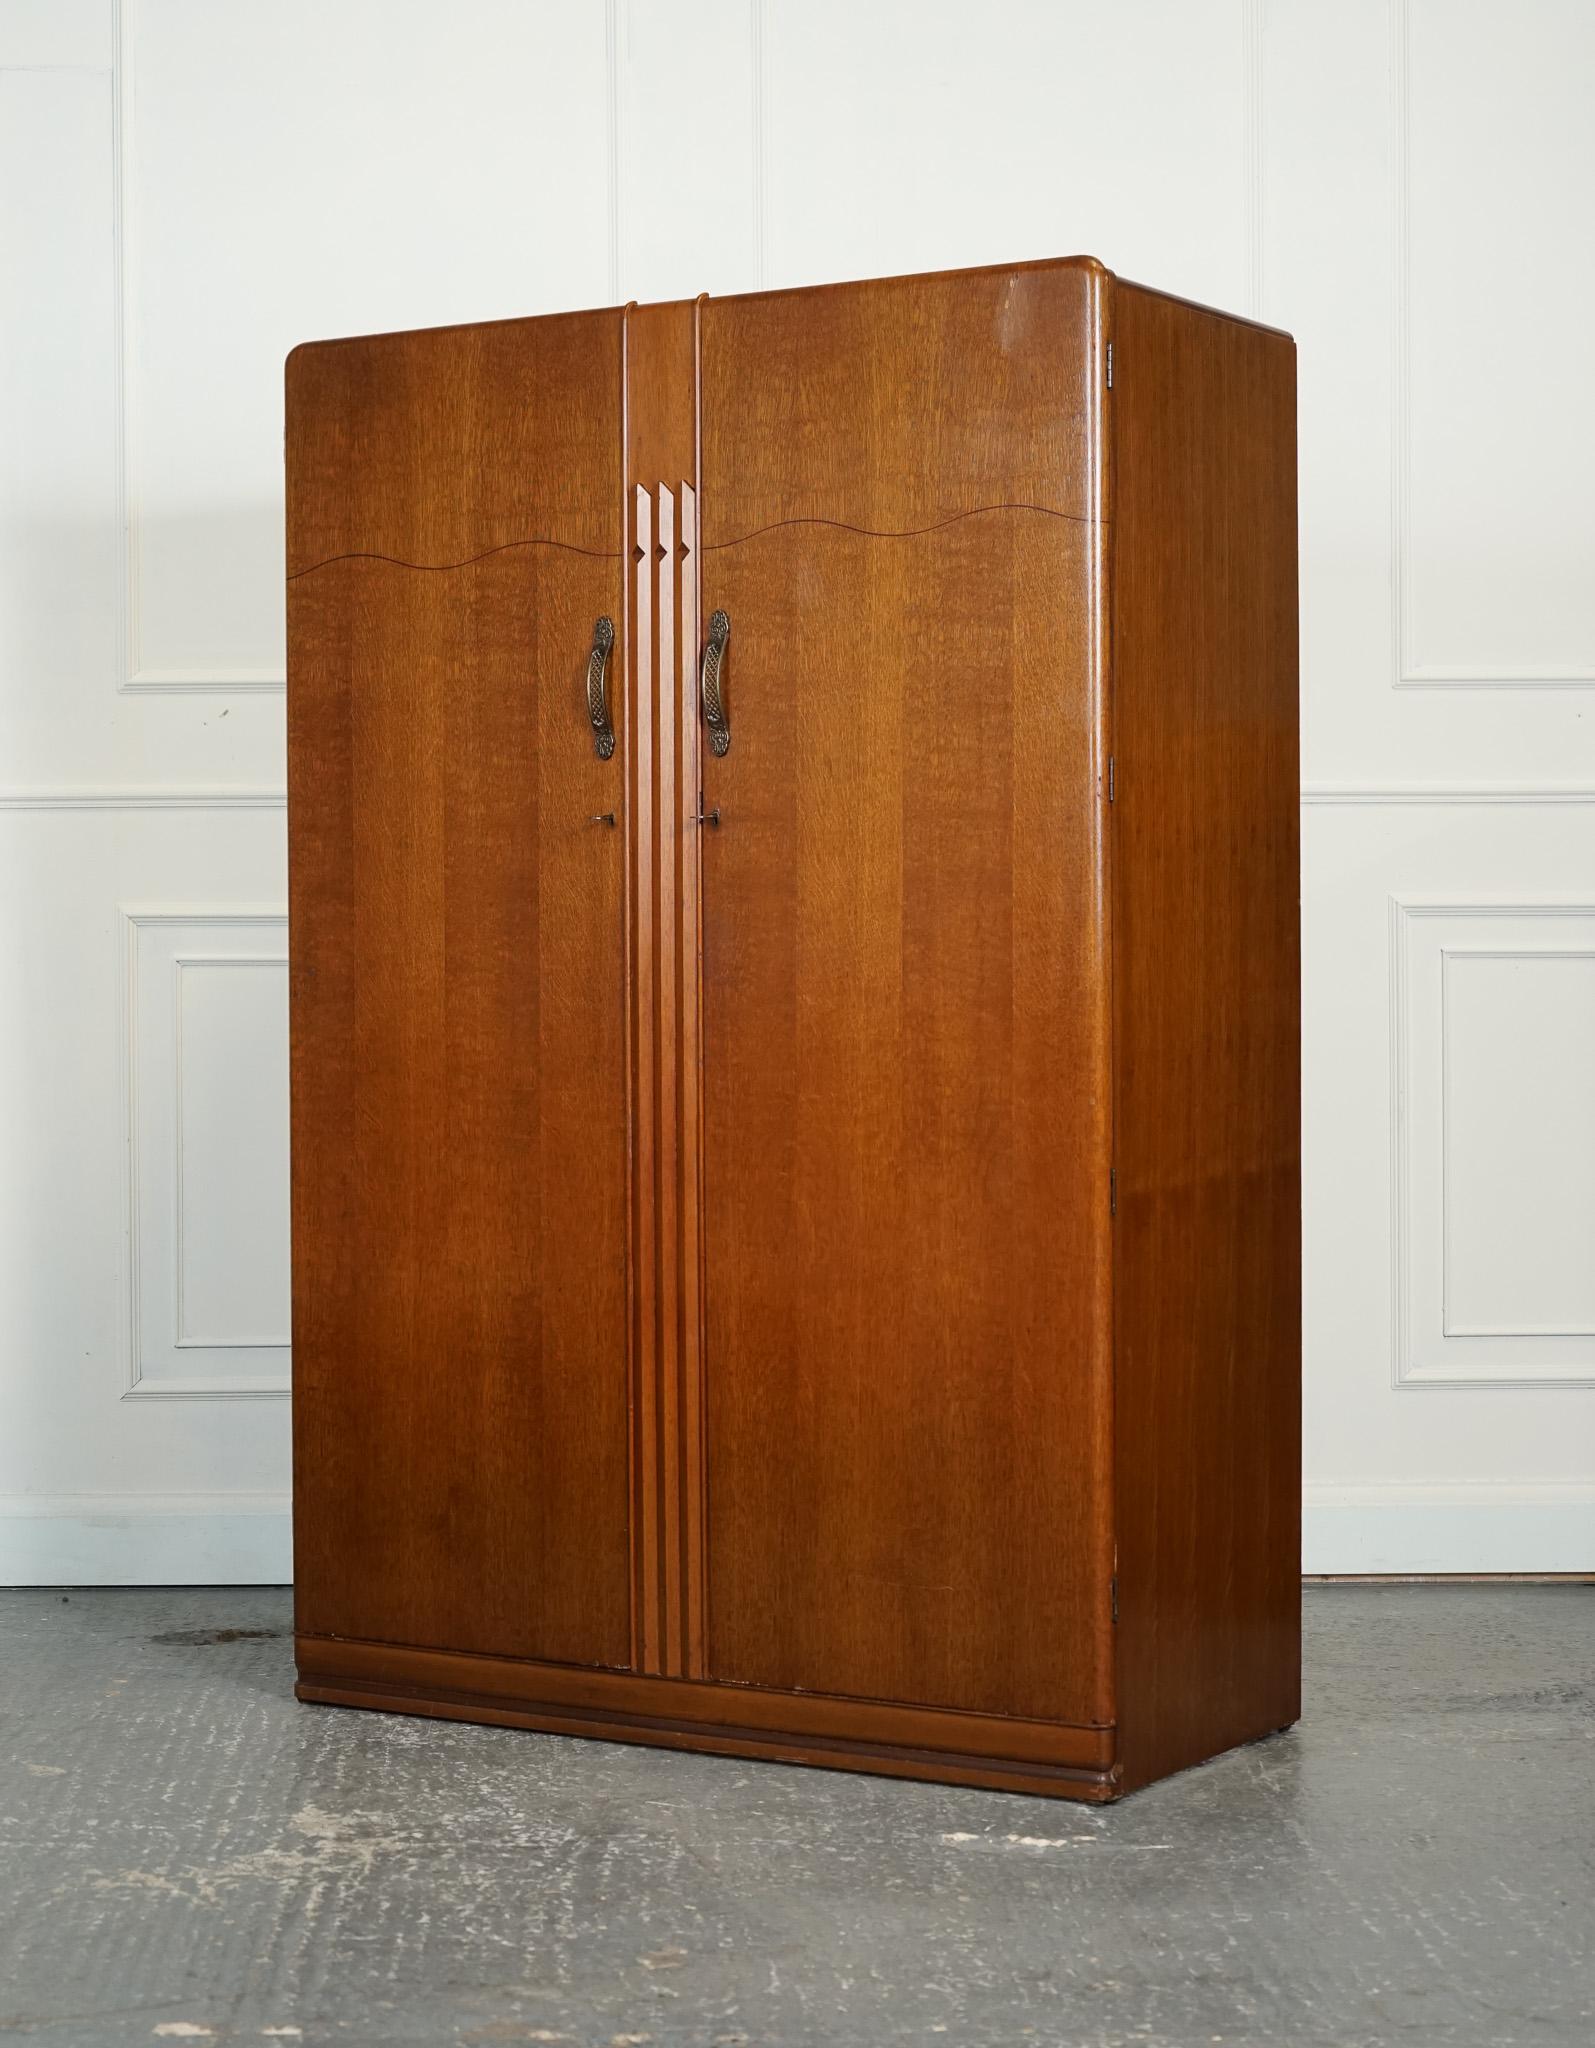 
We are delighted to offer for sale this Lovely Vintage Art Deco Style Wardrobe.

The vintage Art Deco two door wardrobe by Lebus Furniture is a stylish and functional piece of furniture that exudes elegance. Made from high-qualitywood, it features